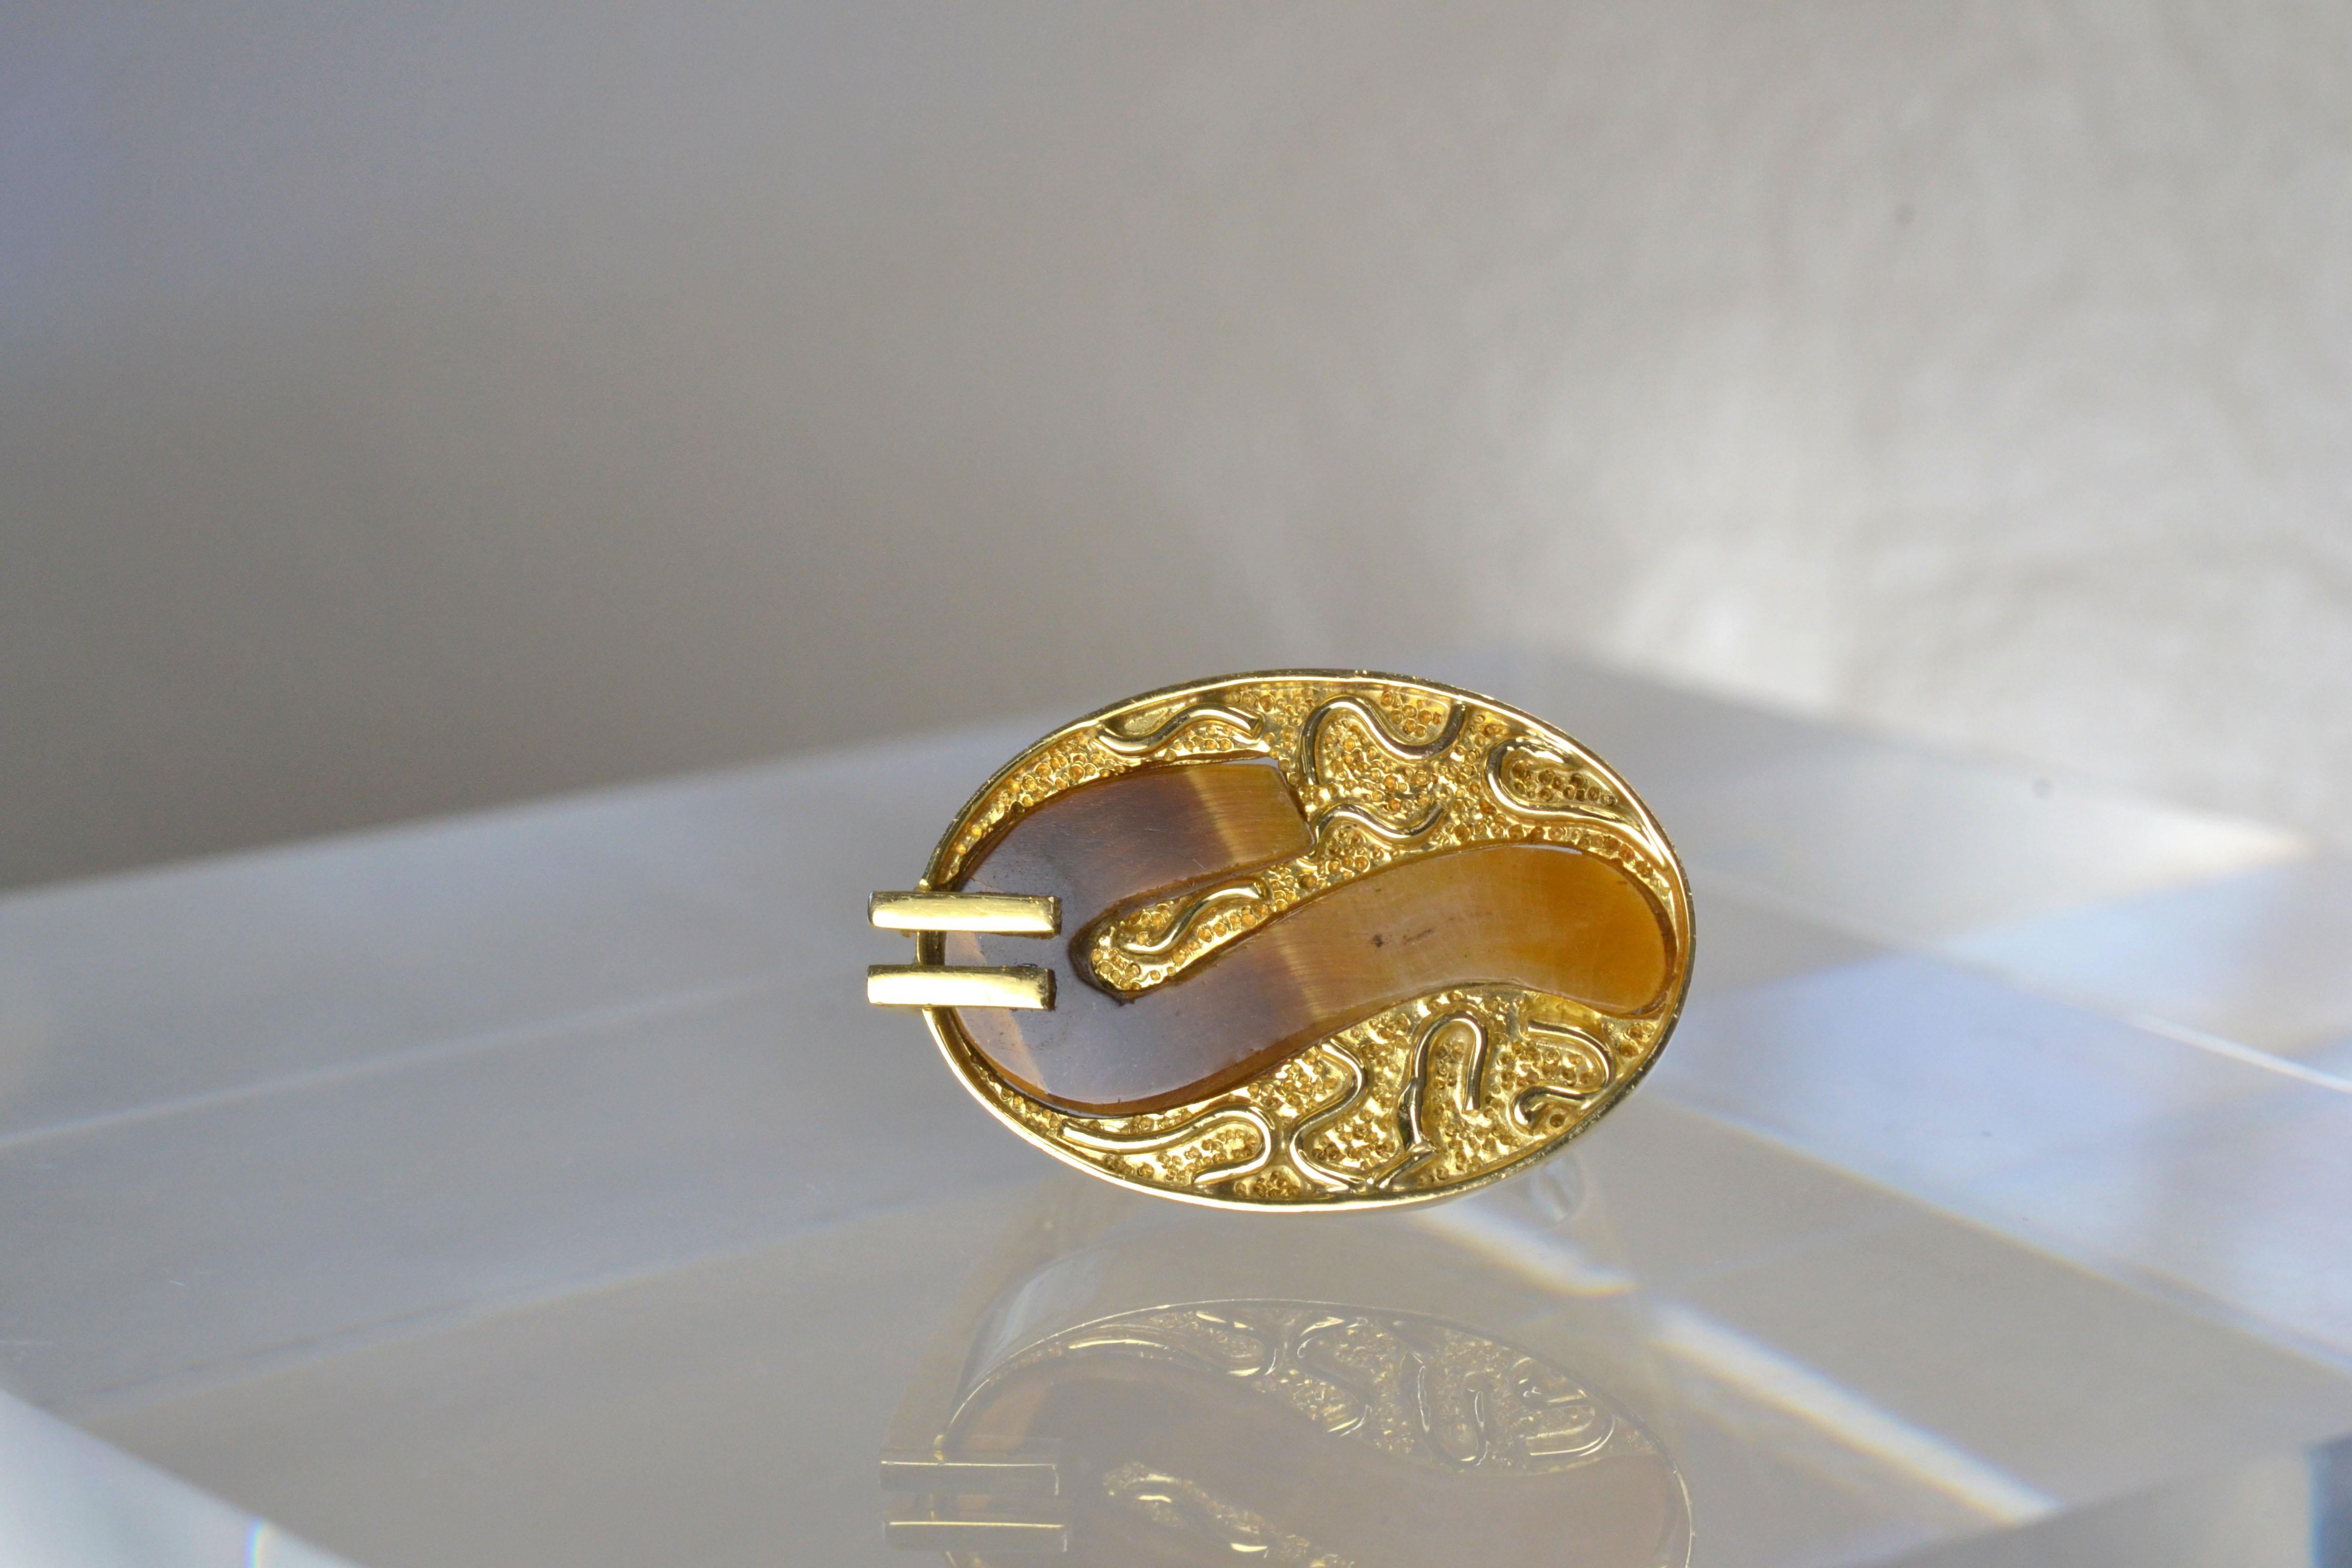 Vintage 14k Gold Tiger's Eye Unisex Signet Ring, One-of-a-kind In Good Condition For Sale In London, GB